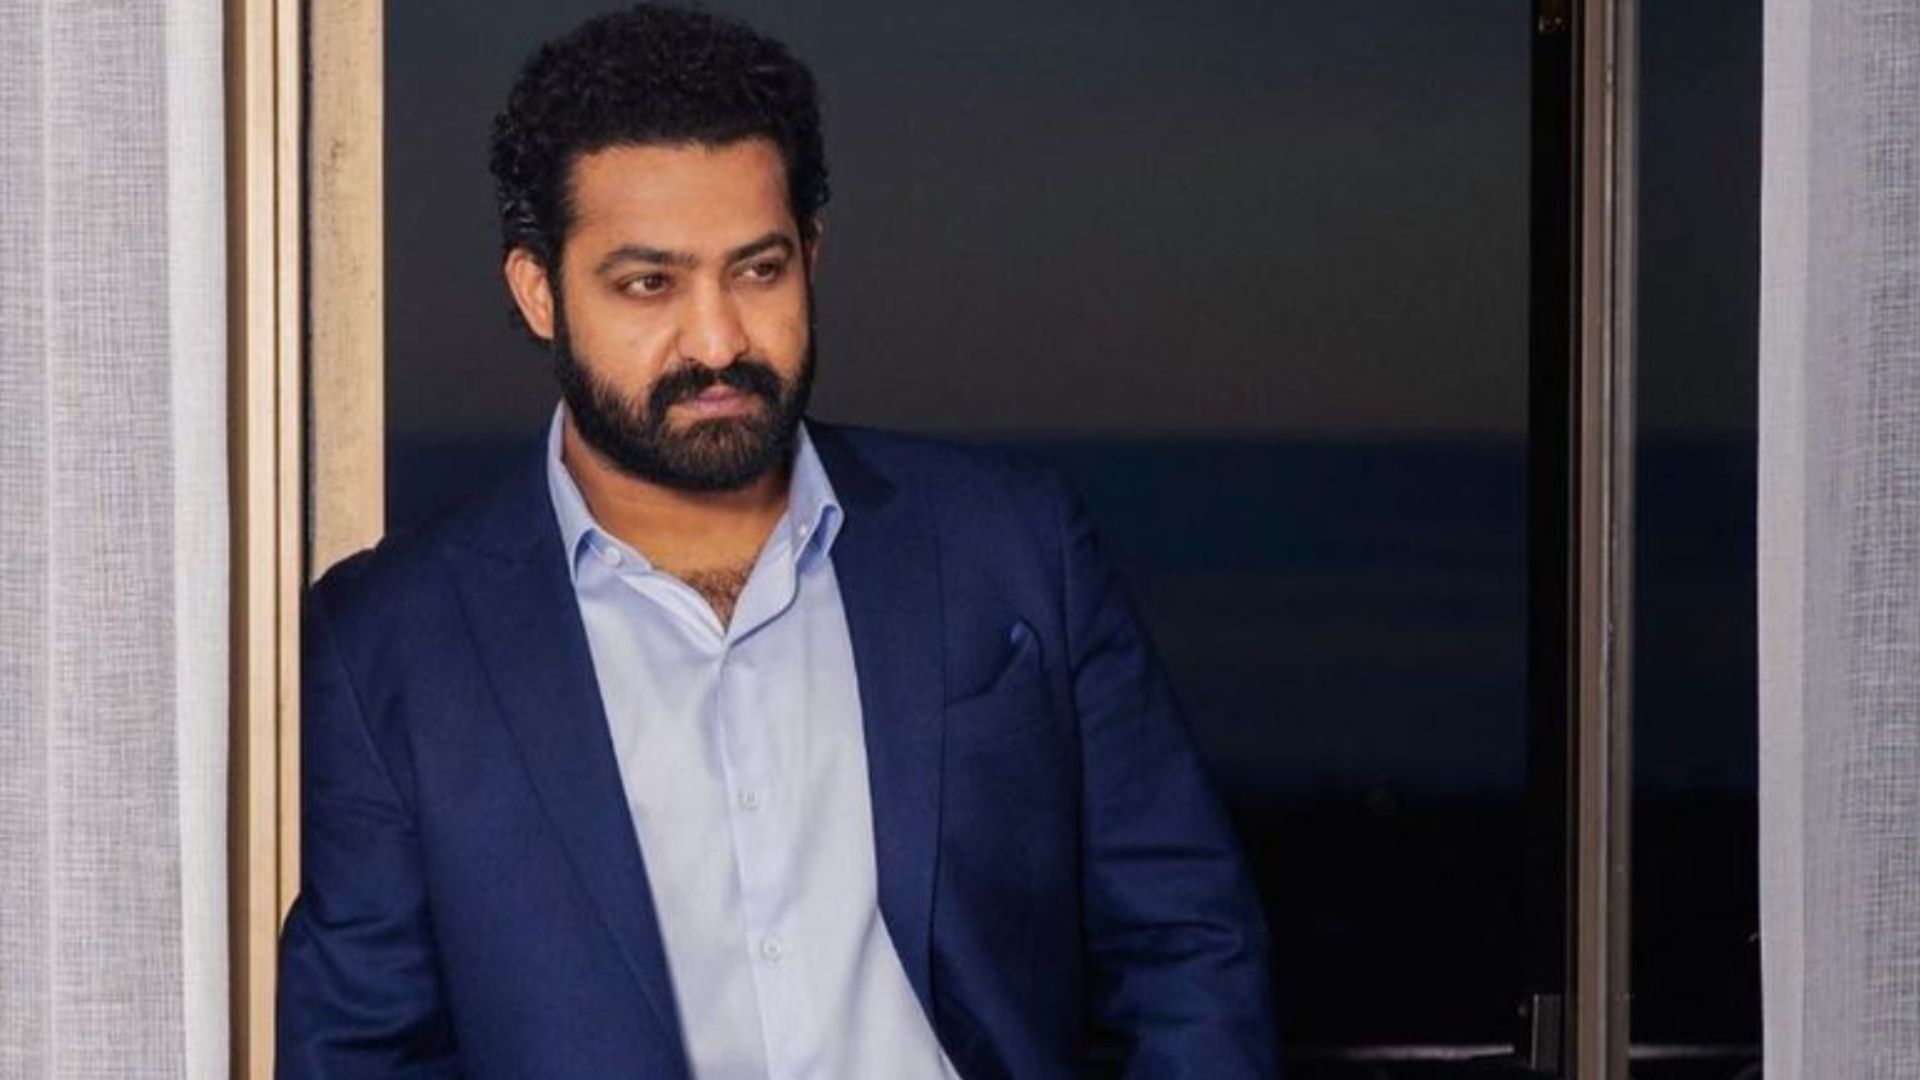 Jr NTR reaches India from earthquake-hit Japan, expresses his ‘deep shock’: ‘Spent entire last week there’